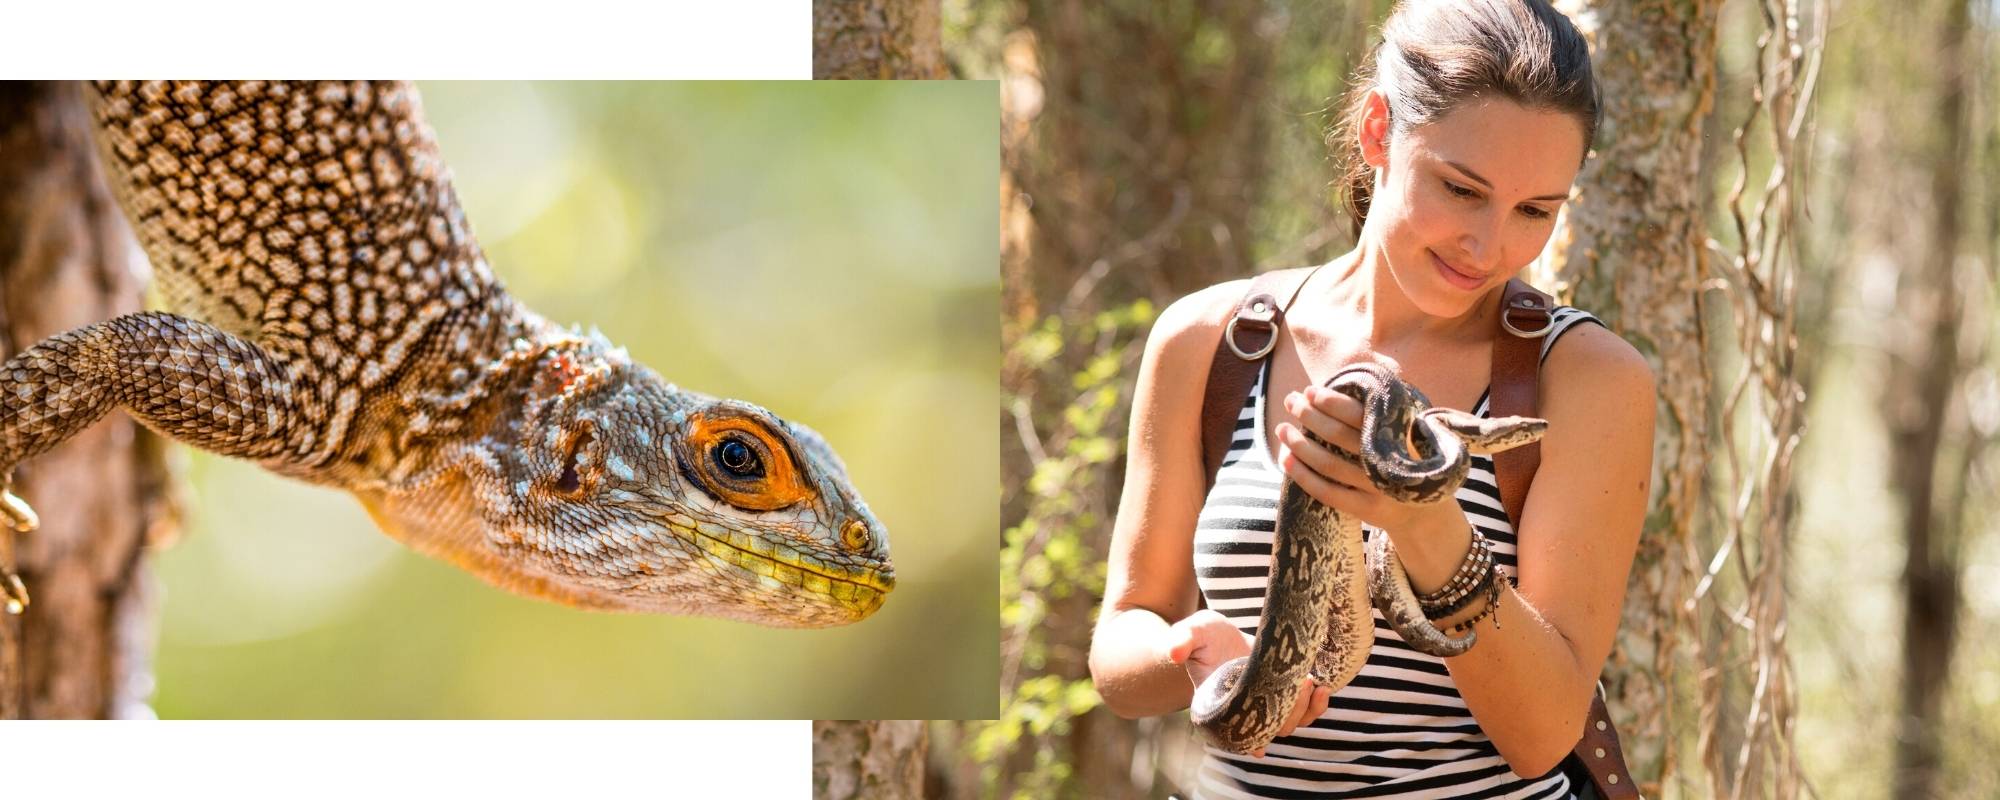 Shannon Wild with reptiles in Madagascar